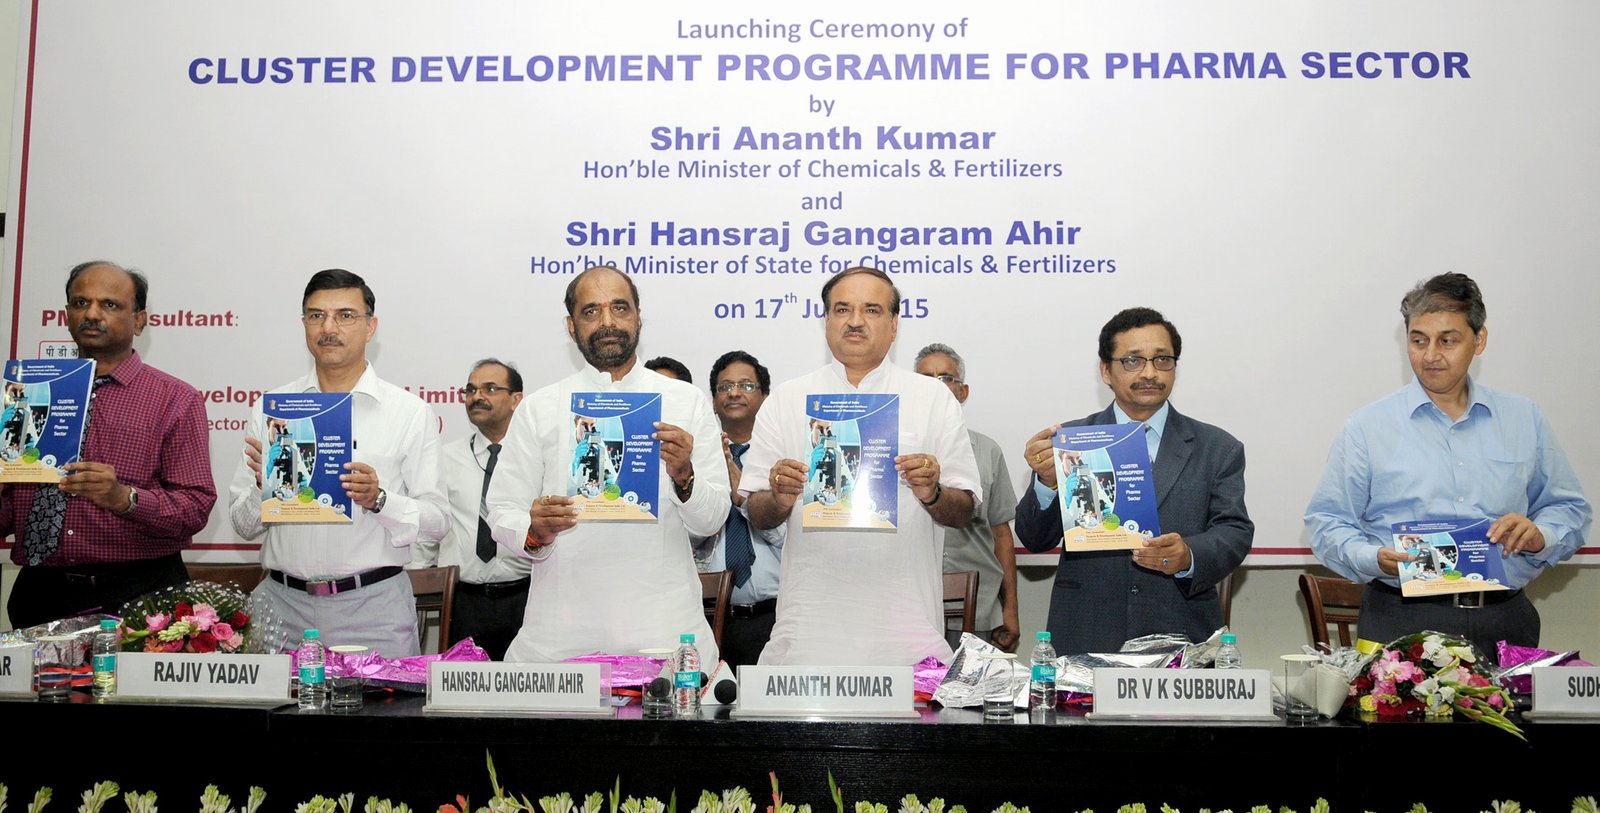 The union minister for chemicals and fertilizers, Mr Ananth Kumar (M) launching the â€œCluster Development Programme for Pharma Sector", in New Delhi on June 17, 2015. The minister of state for chemicals & fertilizers, Mr Hansraj Gangaram Ahir also seen (